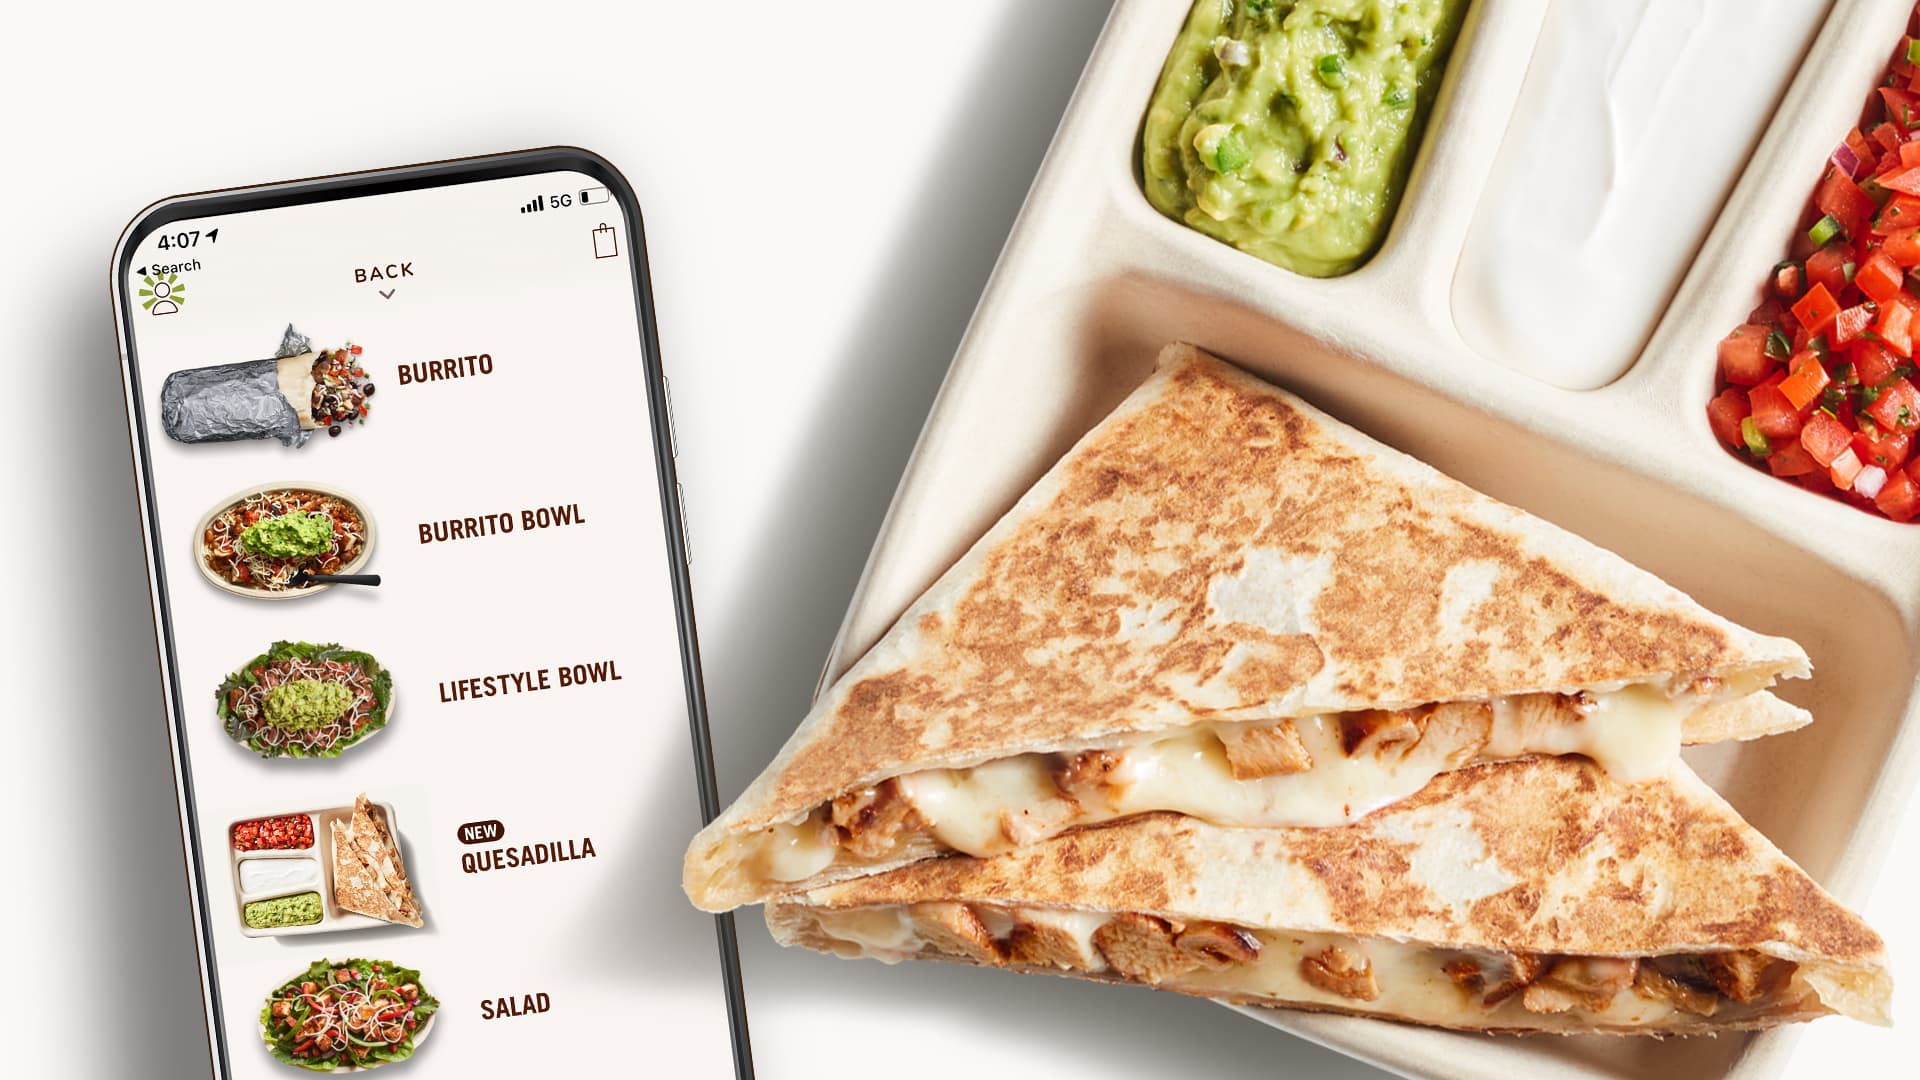 Chipotle’s quesadillas bring in new customers, contributing to digital sales growth